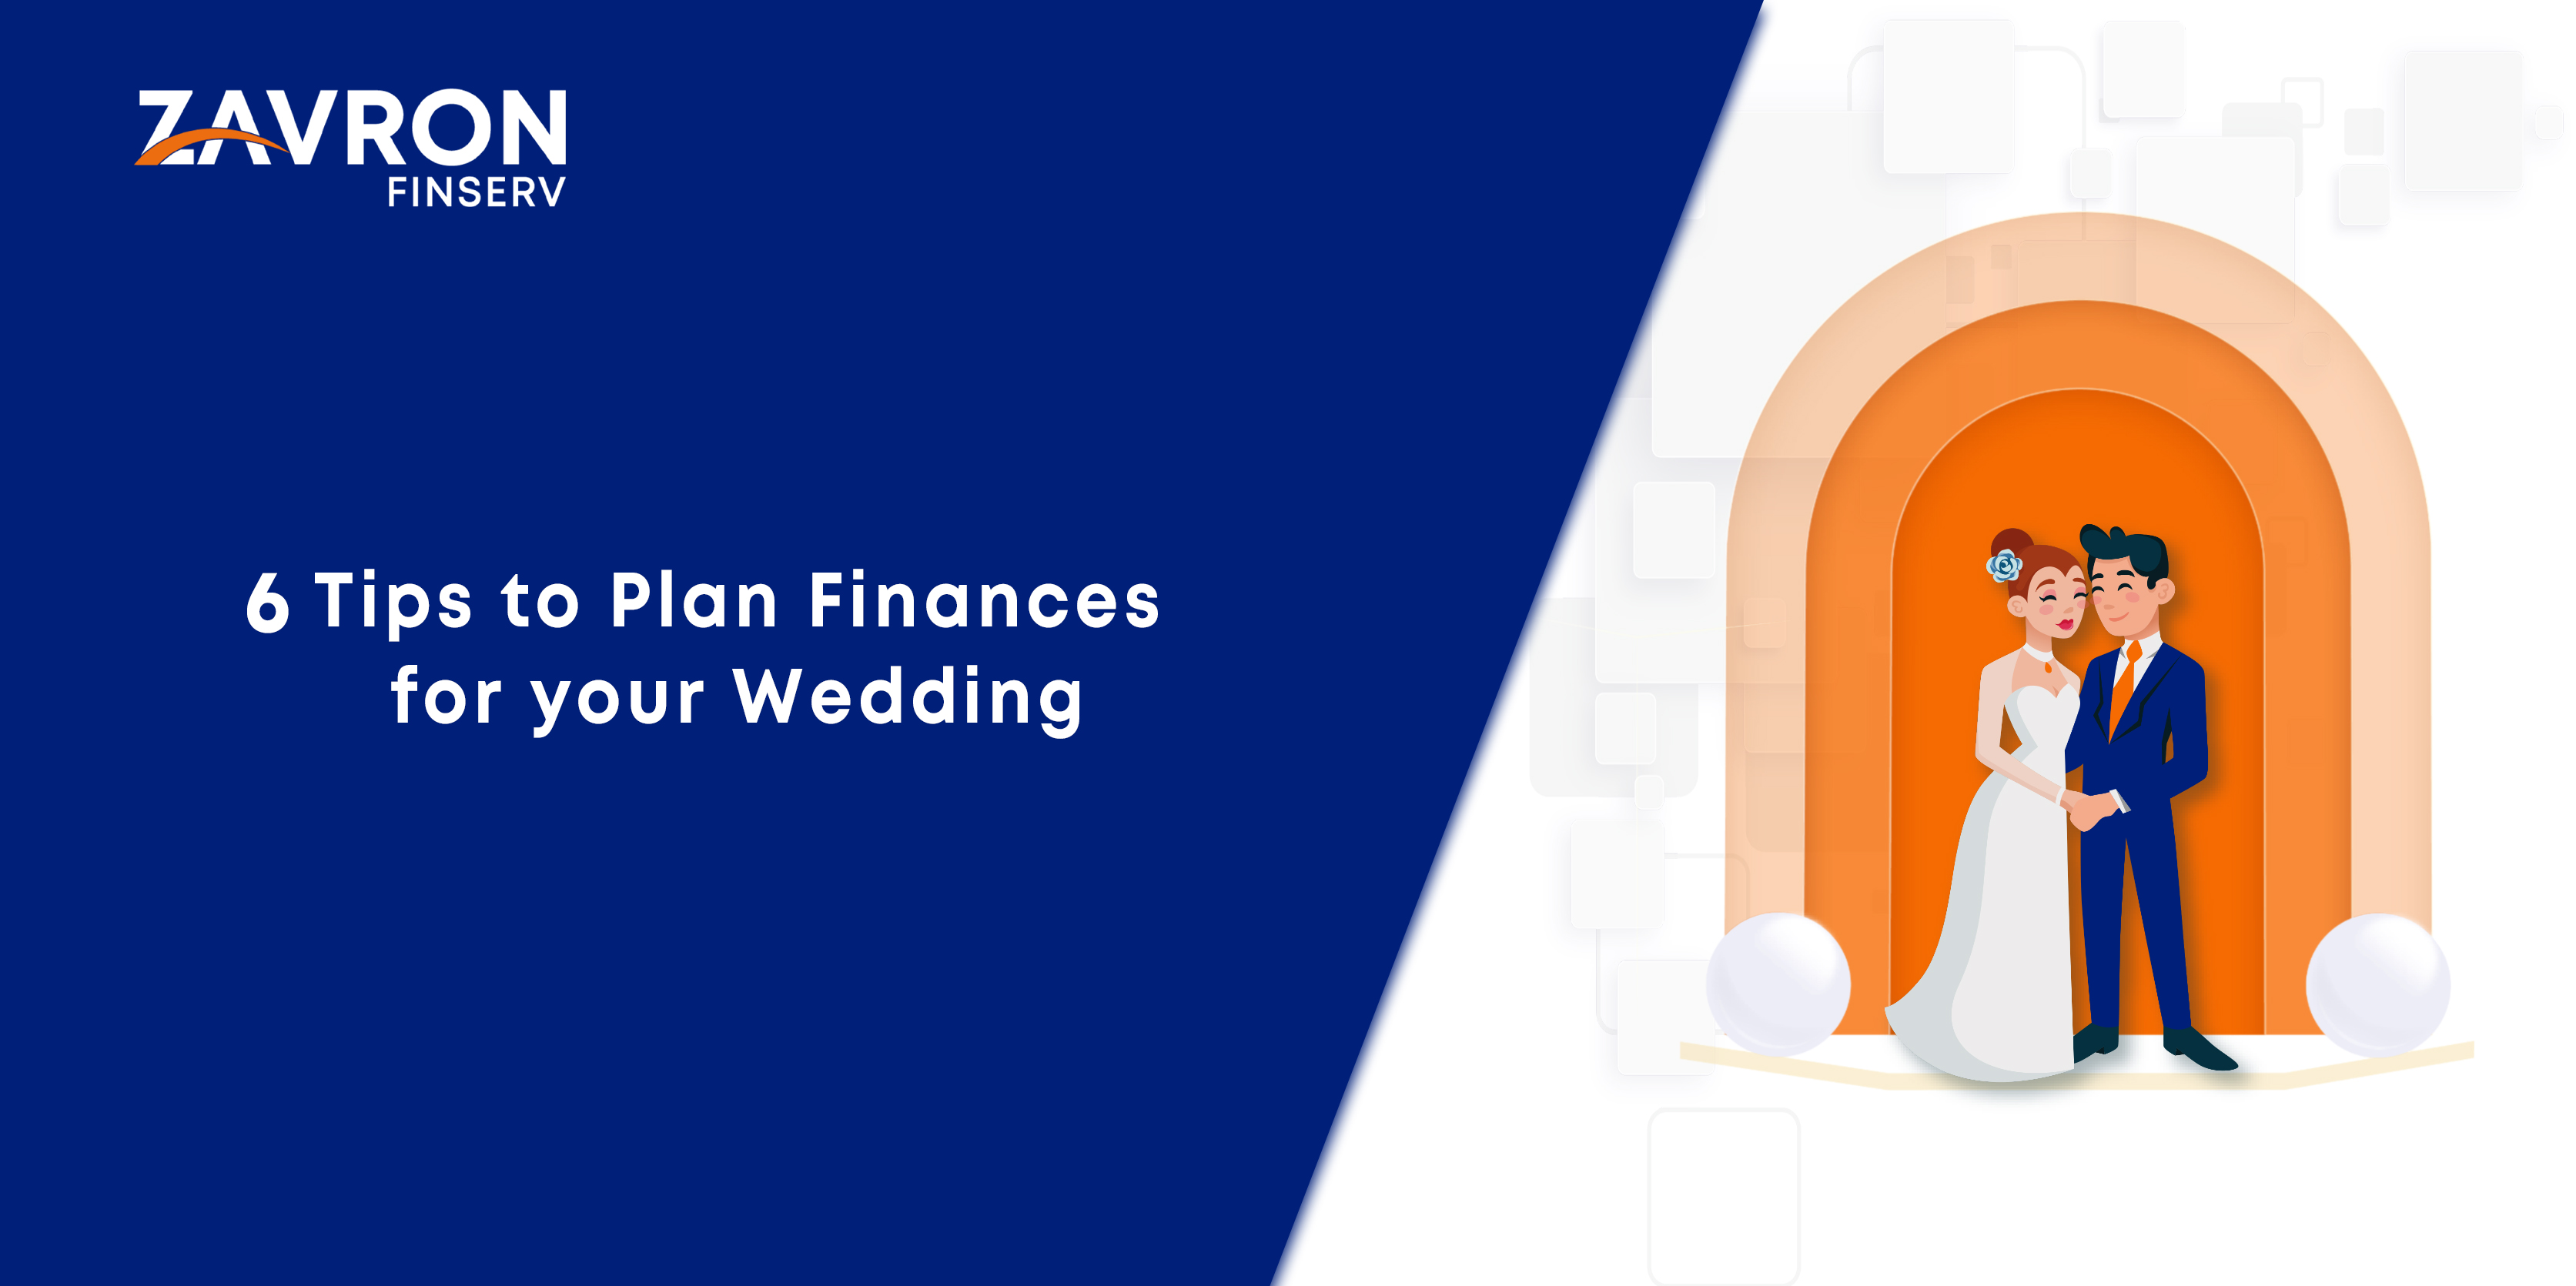 6 Tips to Plan Finances for your Wedding